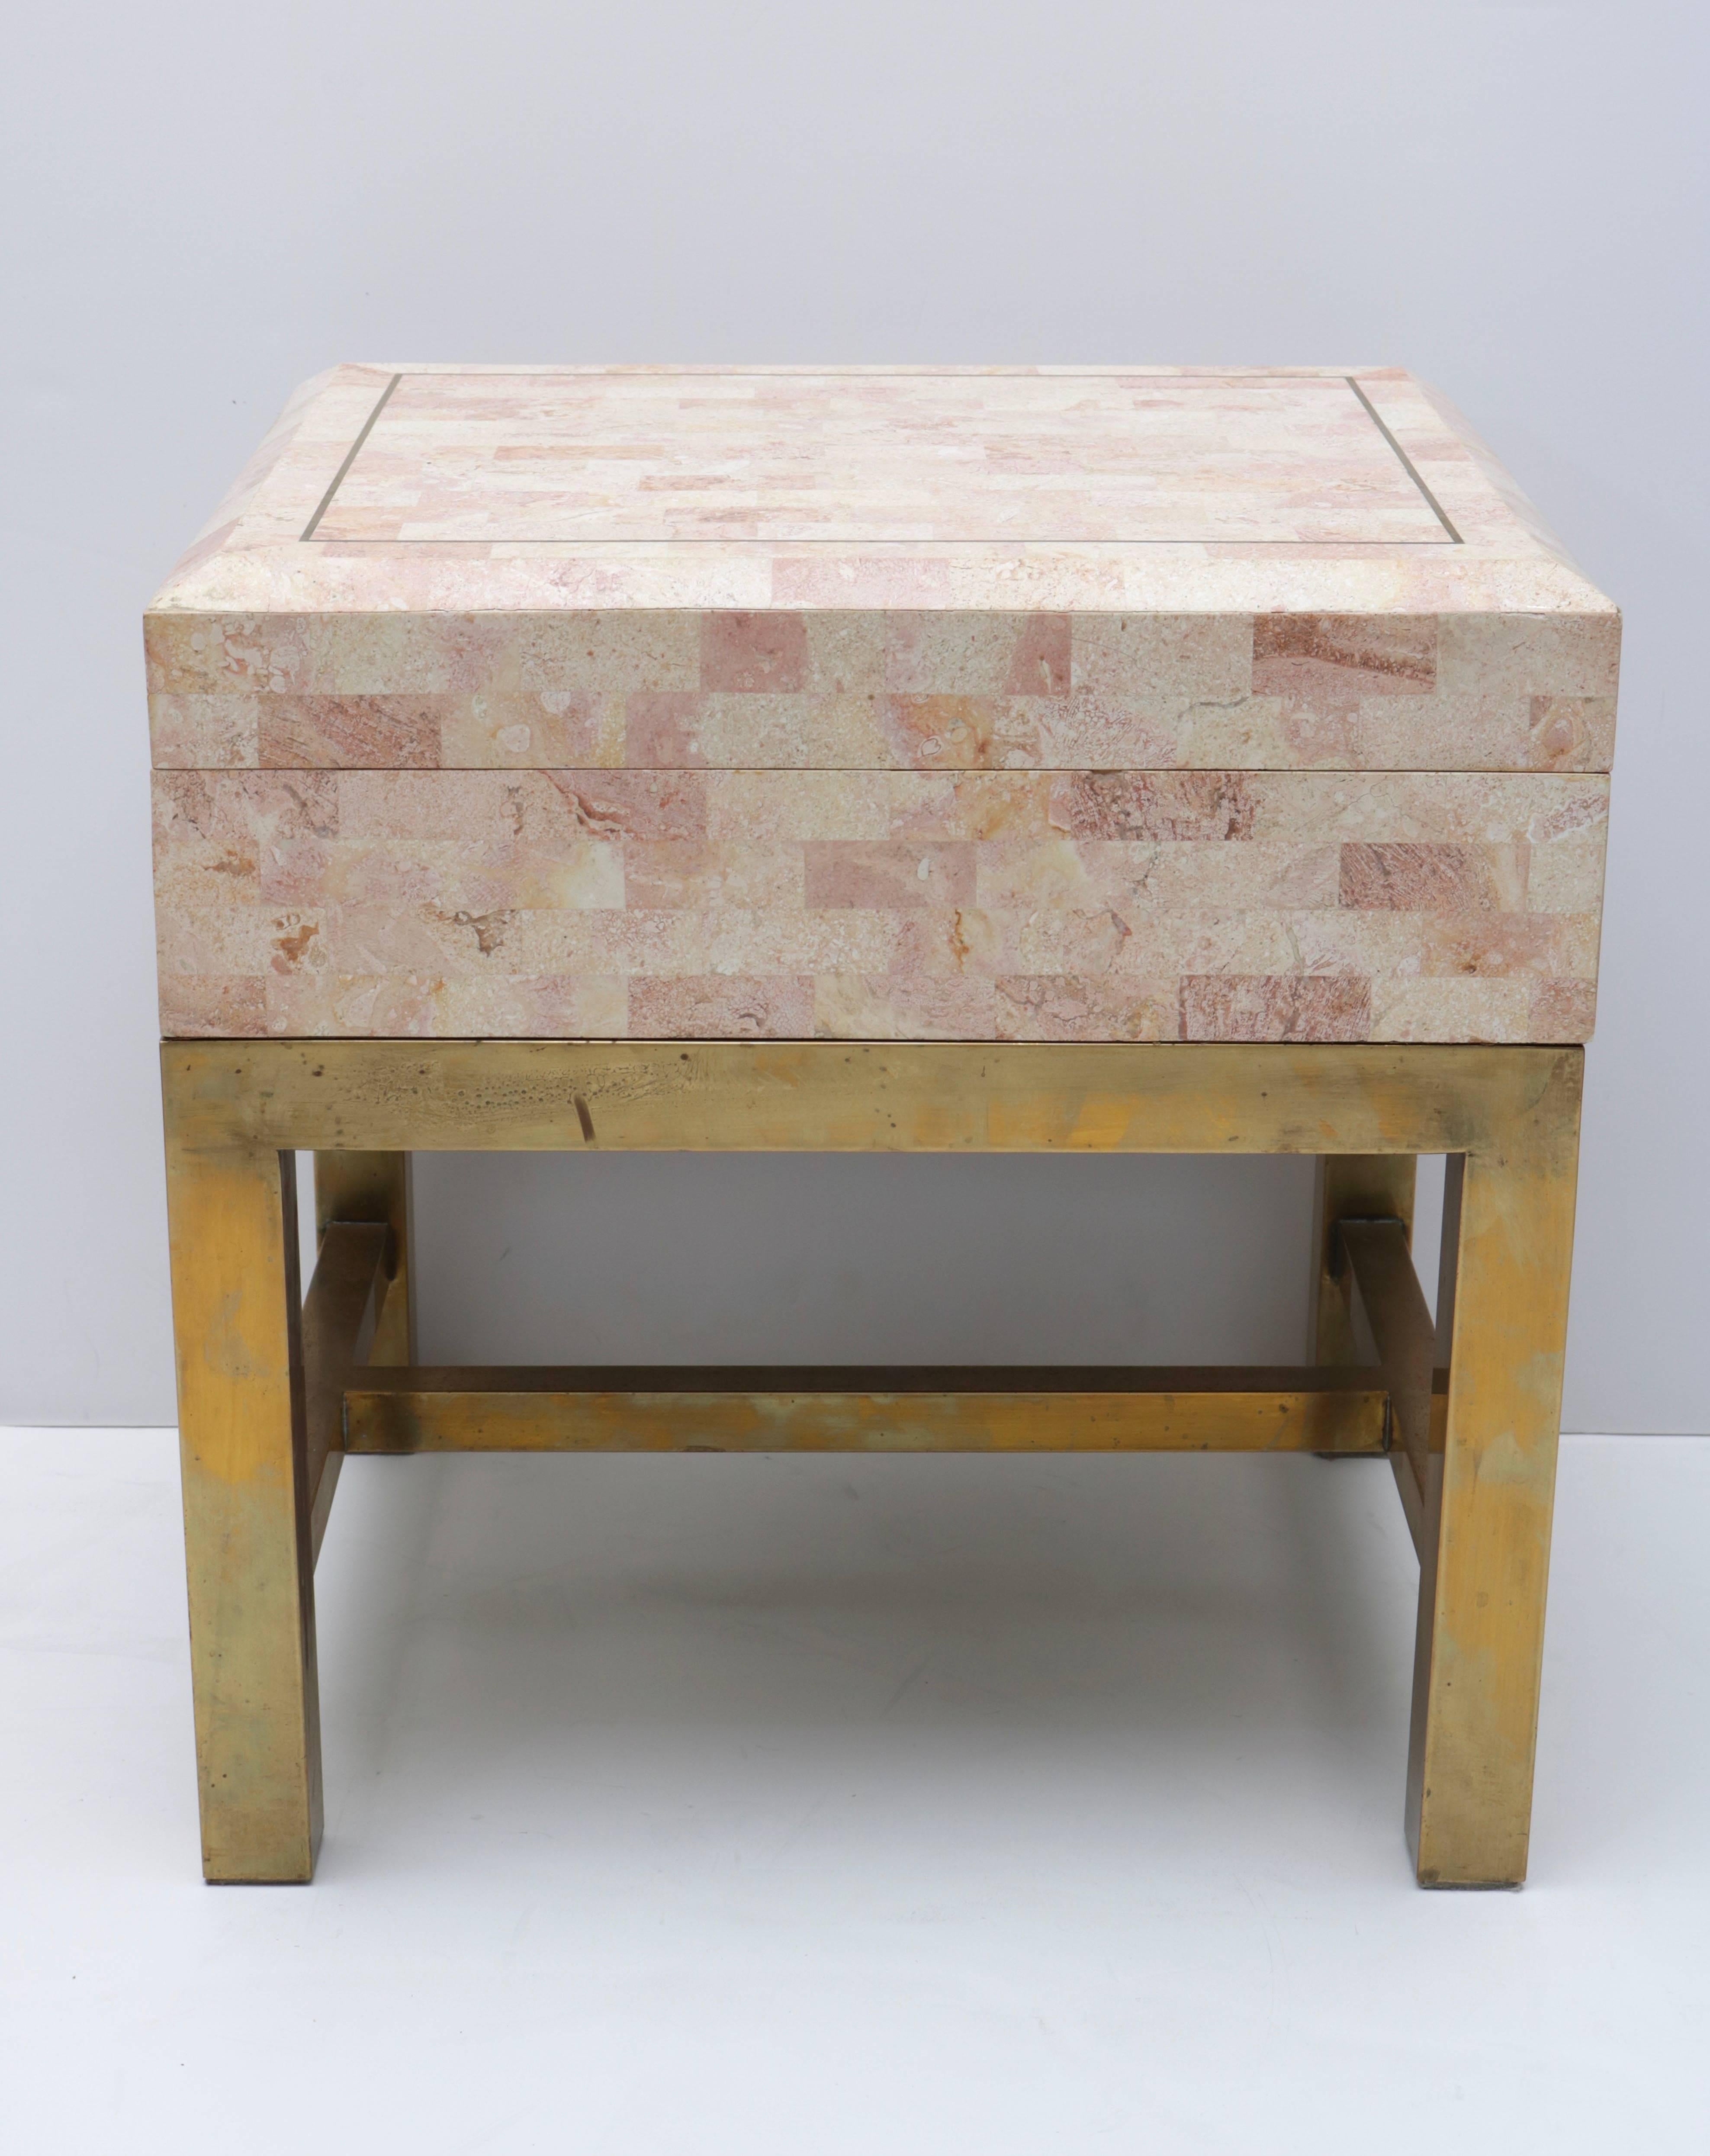 This stylish piece is very much in the manner of pieces created by Maitland Smith in the 1980s and 1990s with its tessellated marble veneers and antique brass metal accents and stand.

Note: Colors are a soft rosey-beige-cream.

For best net